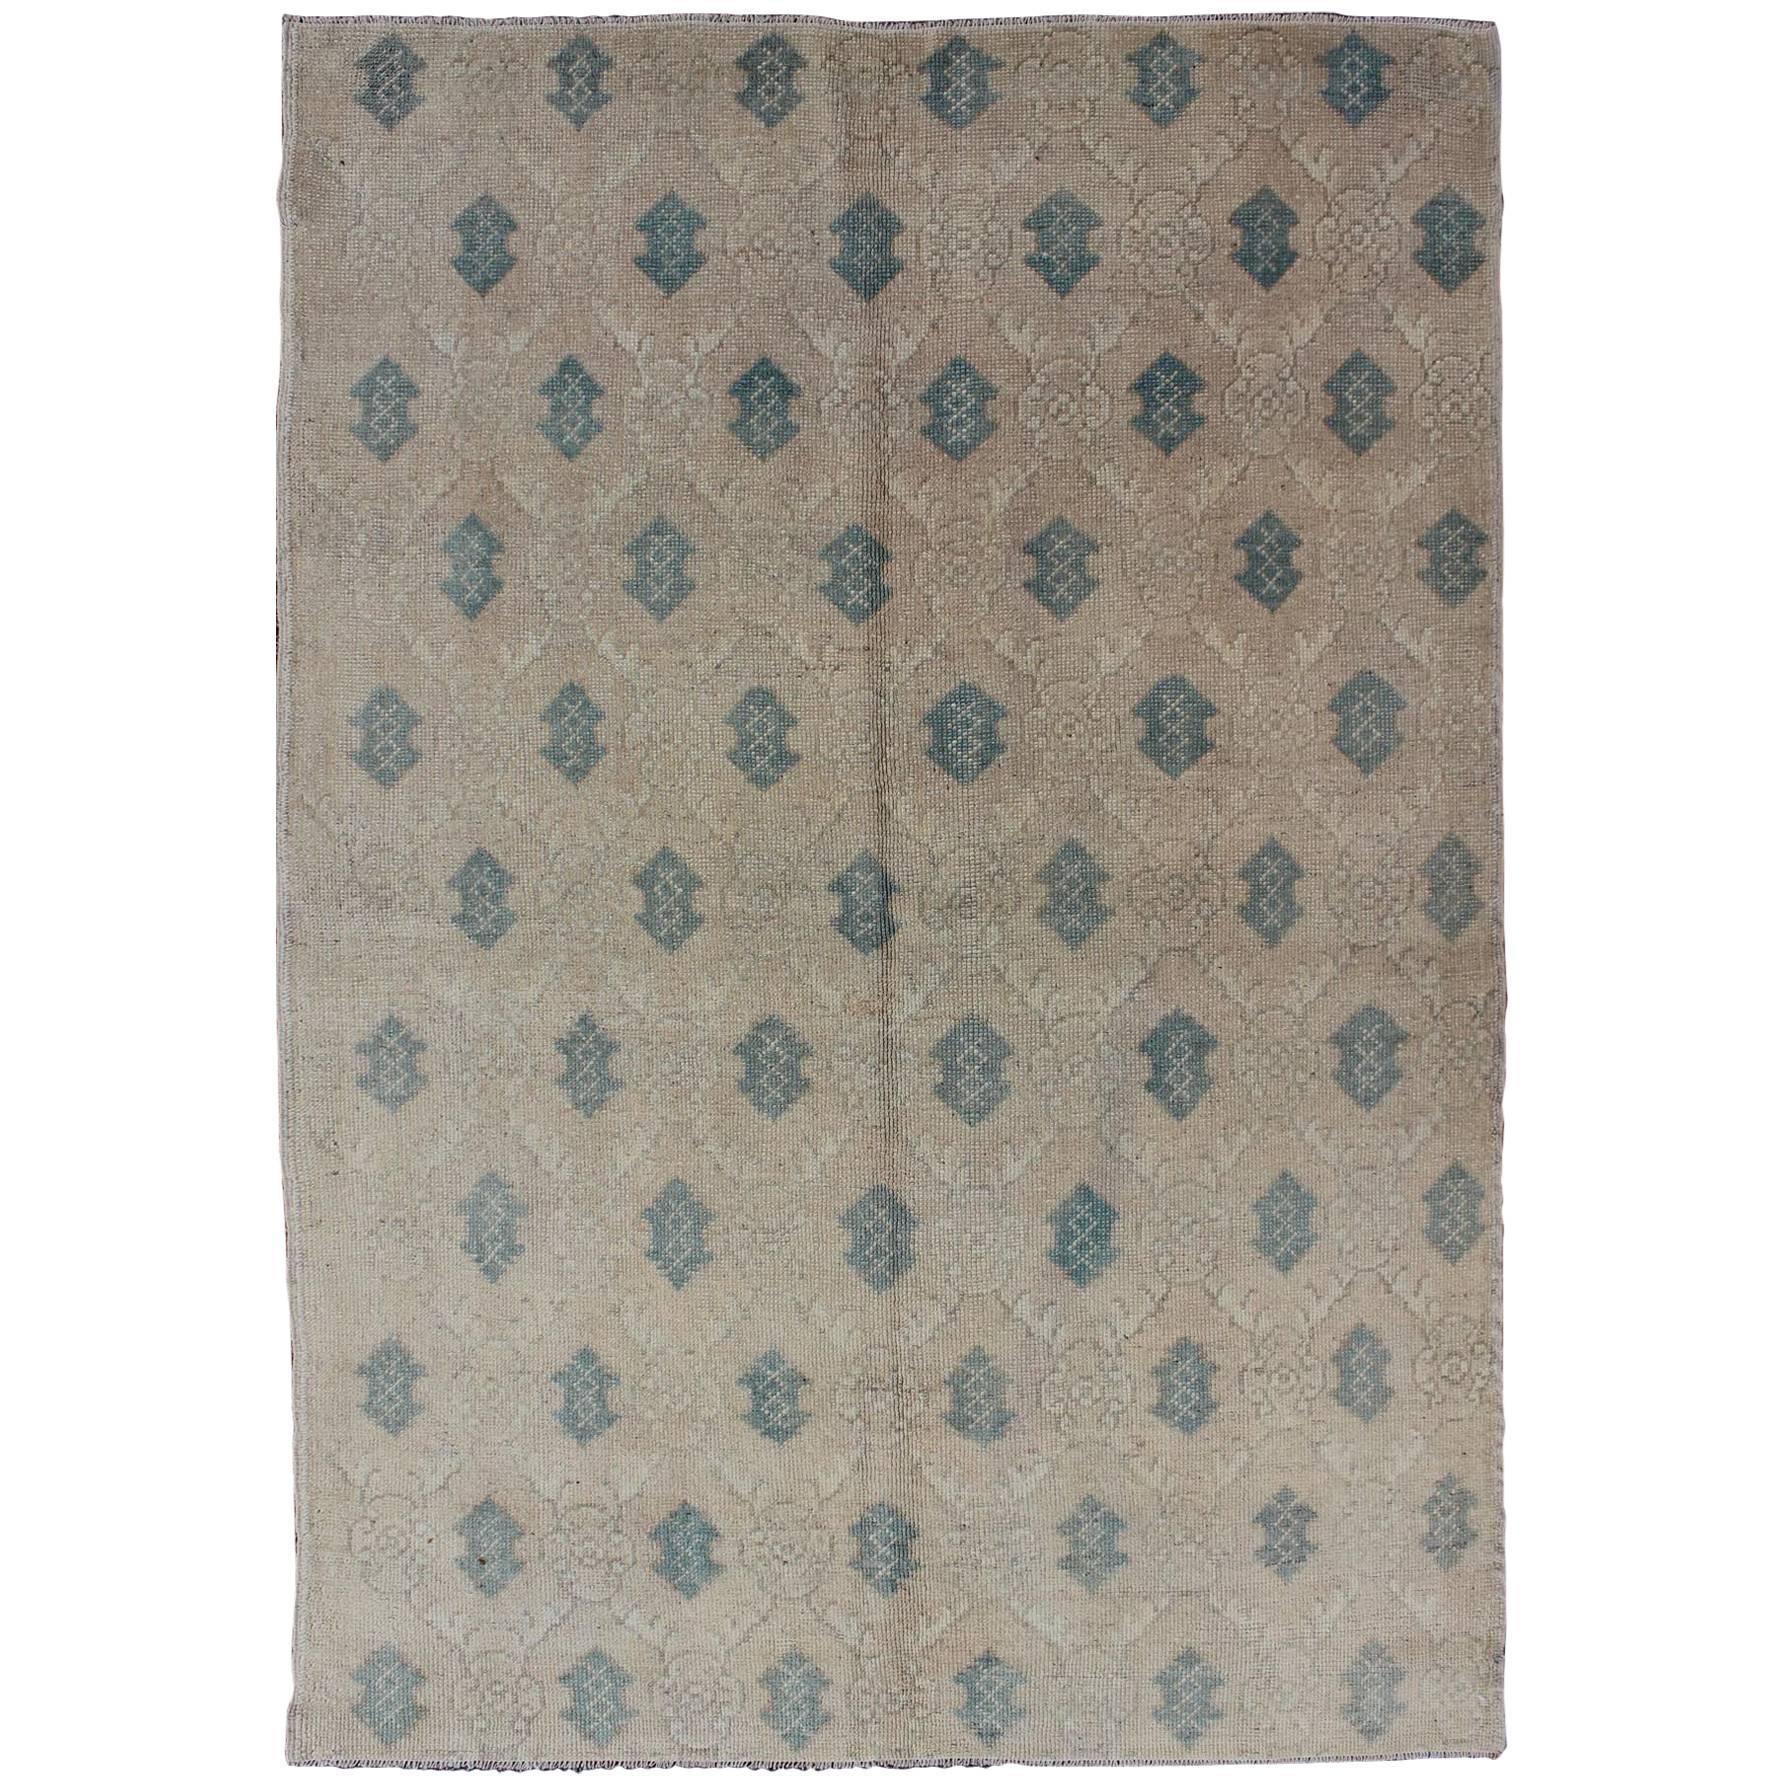 All-Over Design Vintage Turkish Oushak Rug in Shades of Cream and Teal